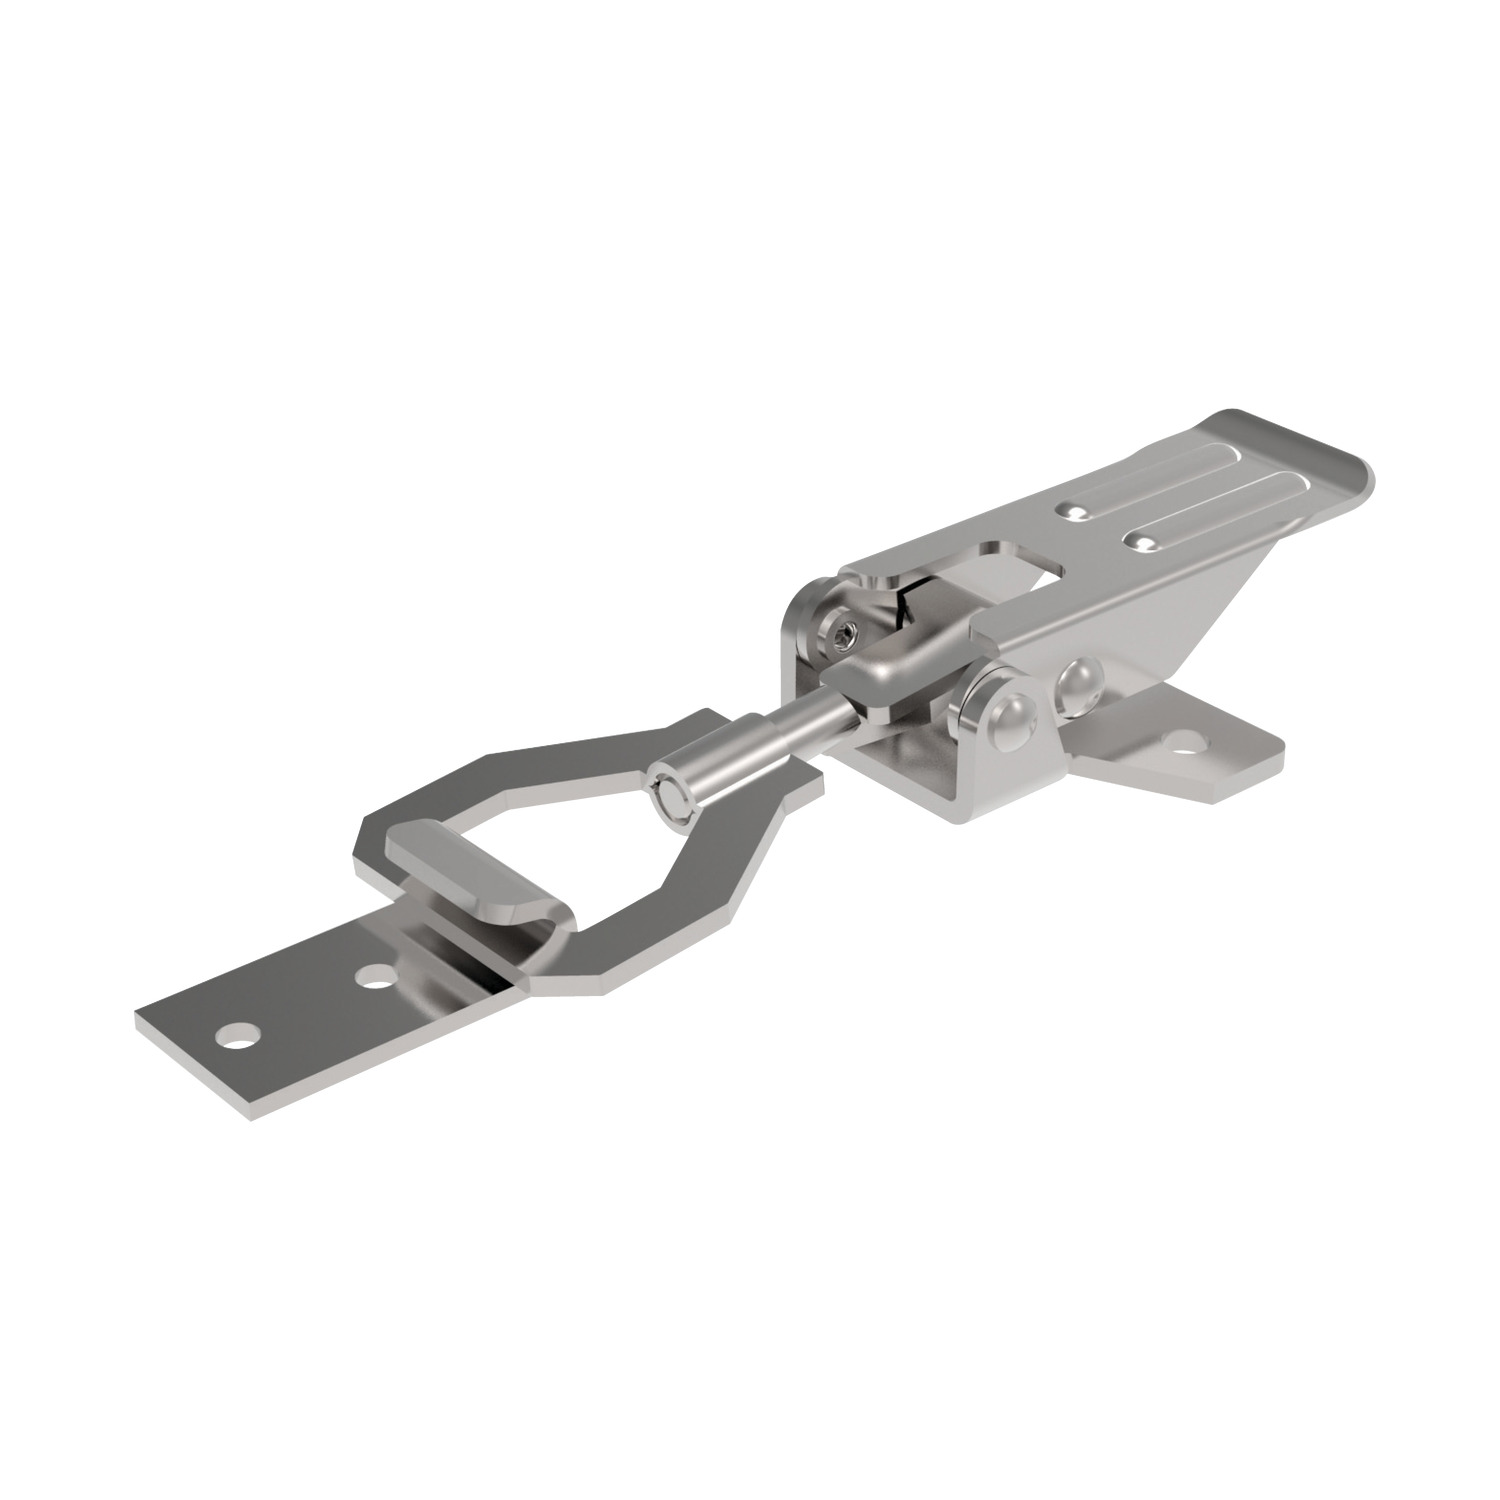 Toggle Latches Made from Steel or Stainless Steel. Draw length adjustable through turns of threaded draw rod.